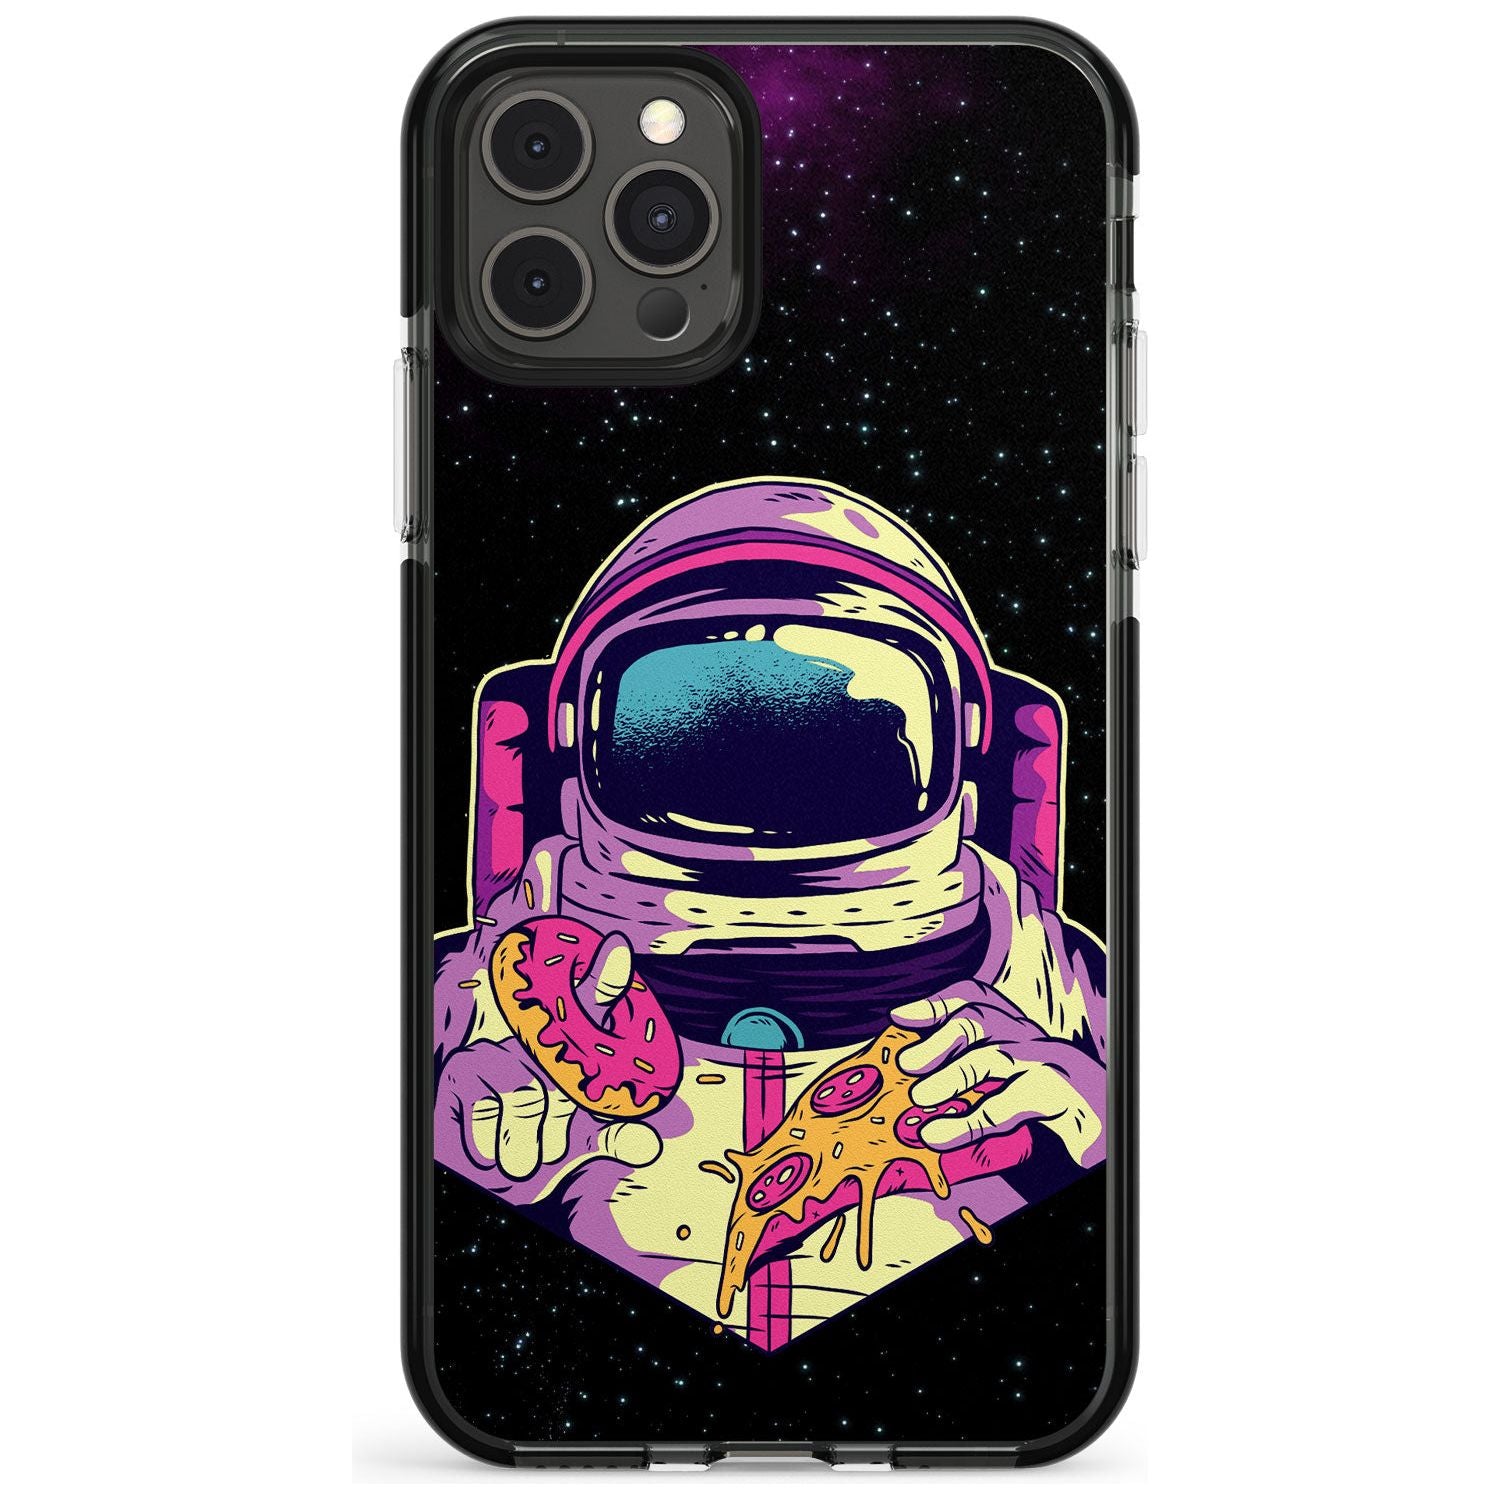 Astro Cheat Meal Black Impact Phone Case for iPhone 11